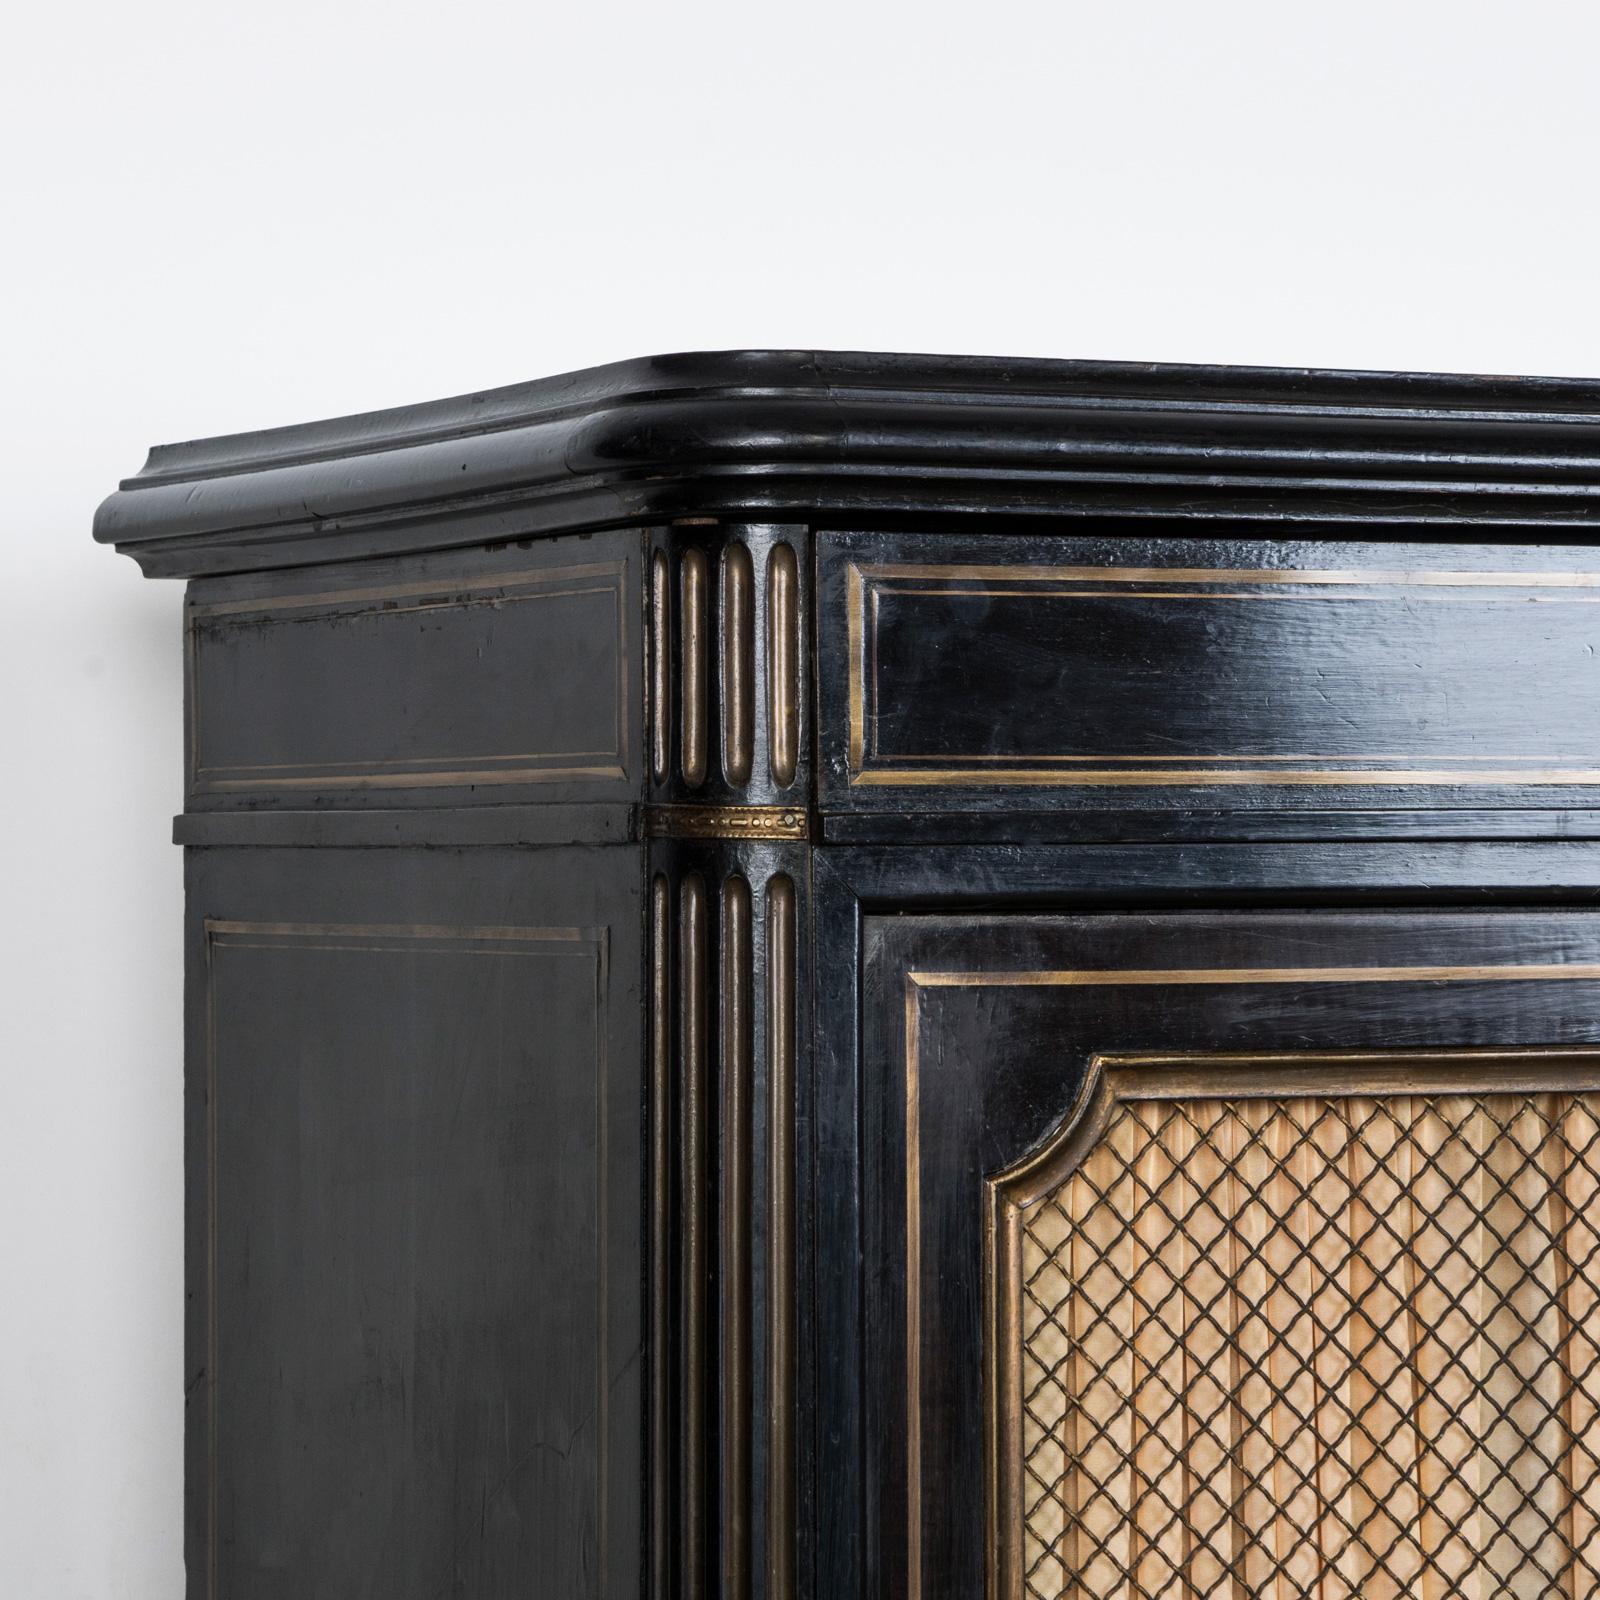 Charming and aesthetic small ebonized black cabinet with brass accents, dating back to the 19th Century in the French Napoleon III style.

This ebonized black cabinet features nice brass embellishments, showcasing a fusion of elegance. Originating